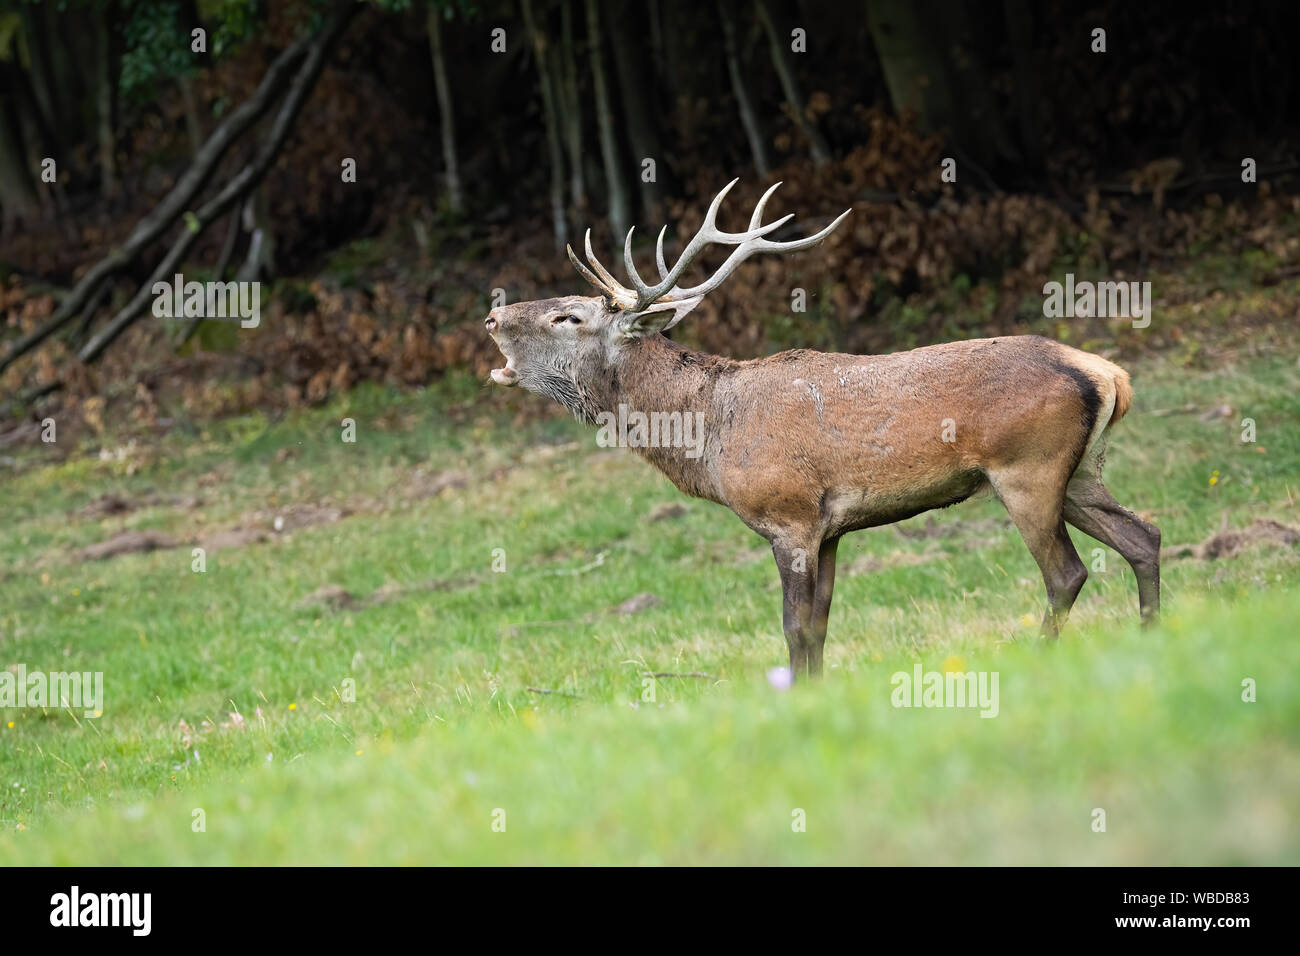 Red deer stag roaring to mark territory in rutting season Stock Photo